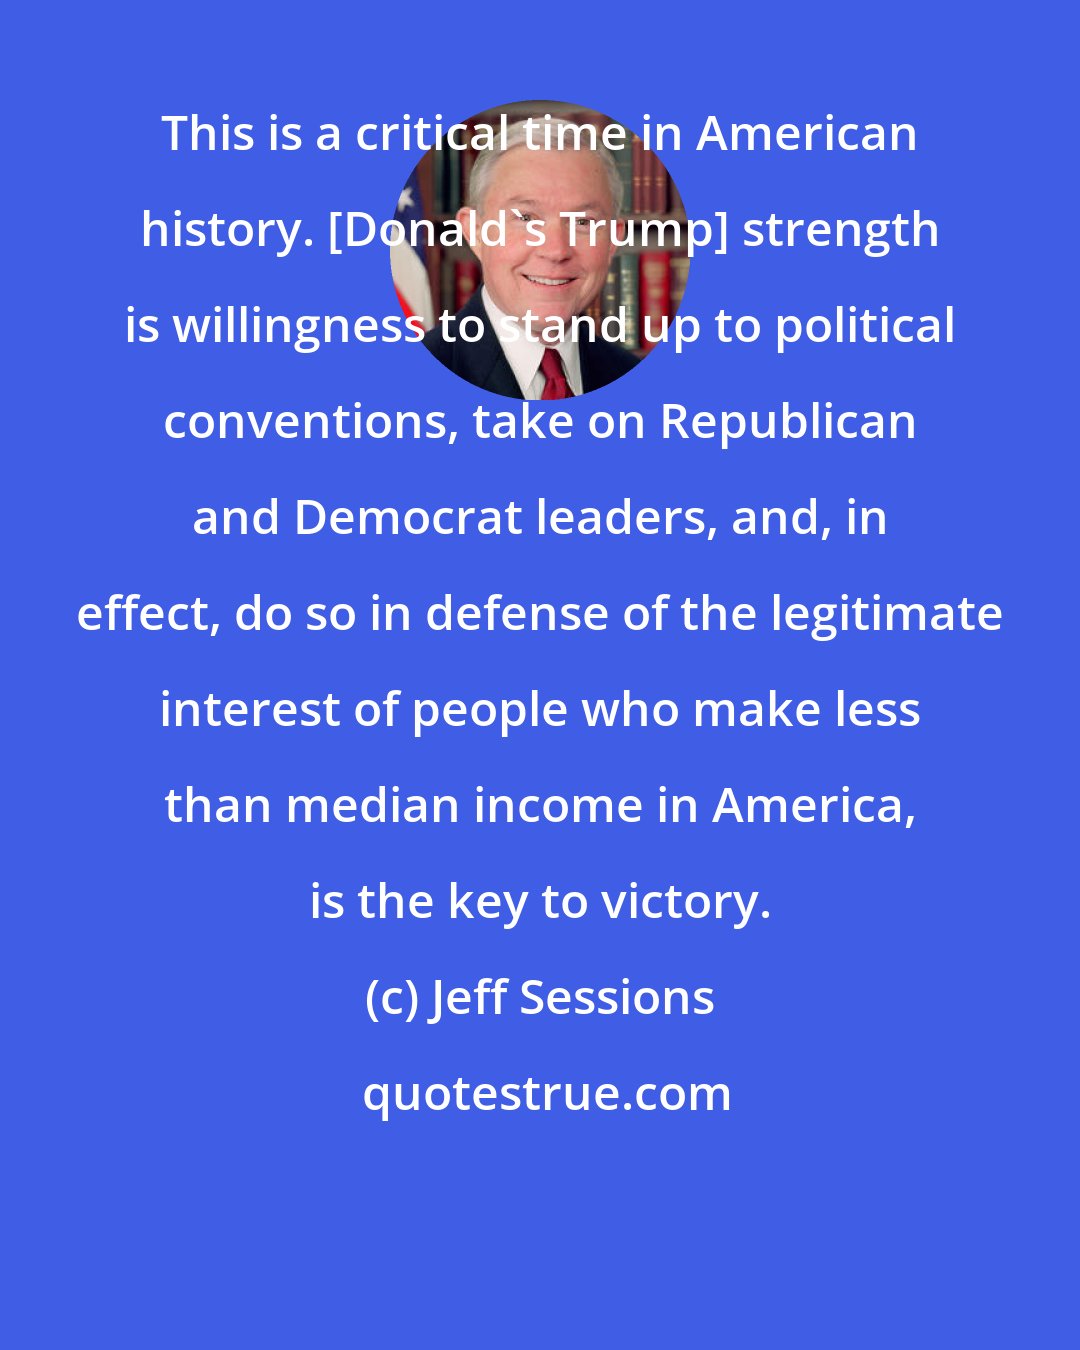 Jeff Sessions: This is a critical time in American history. [Donald's Trump] strength is willingness to stand up to political conventions, take on Republican and Democrat leaders, and, in effect, do so in defense of the legitimate interest of people who make less than median income in America, is the key to victory.